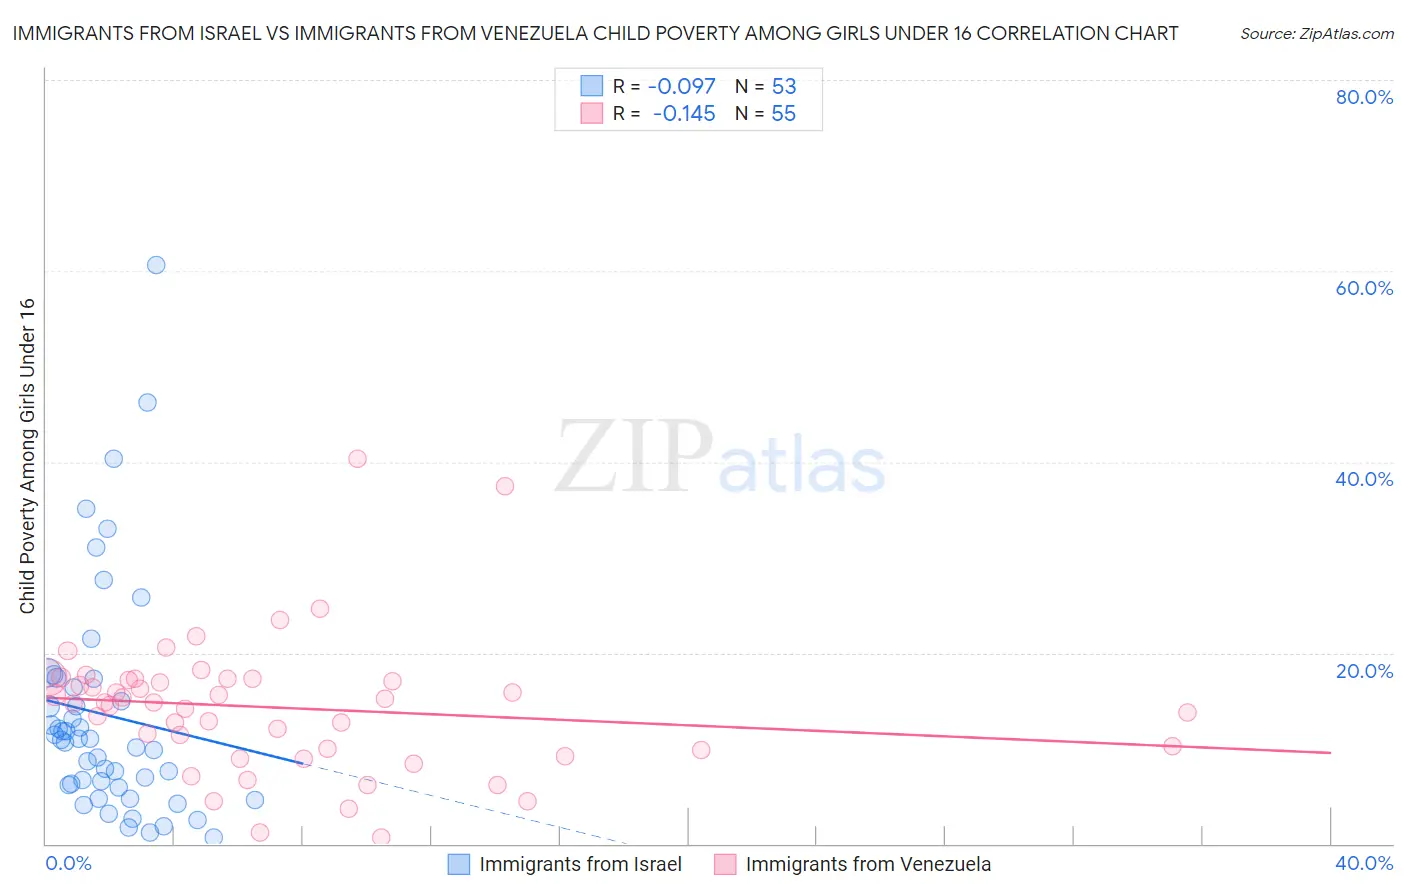 Immigrants from Israel vs Immigrants from Venezuela Child Poverty Among Girls Under 16